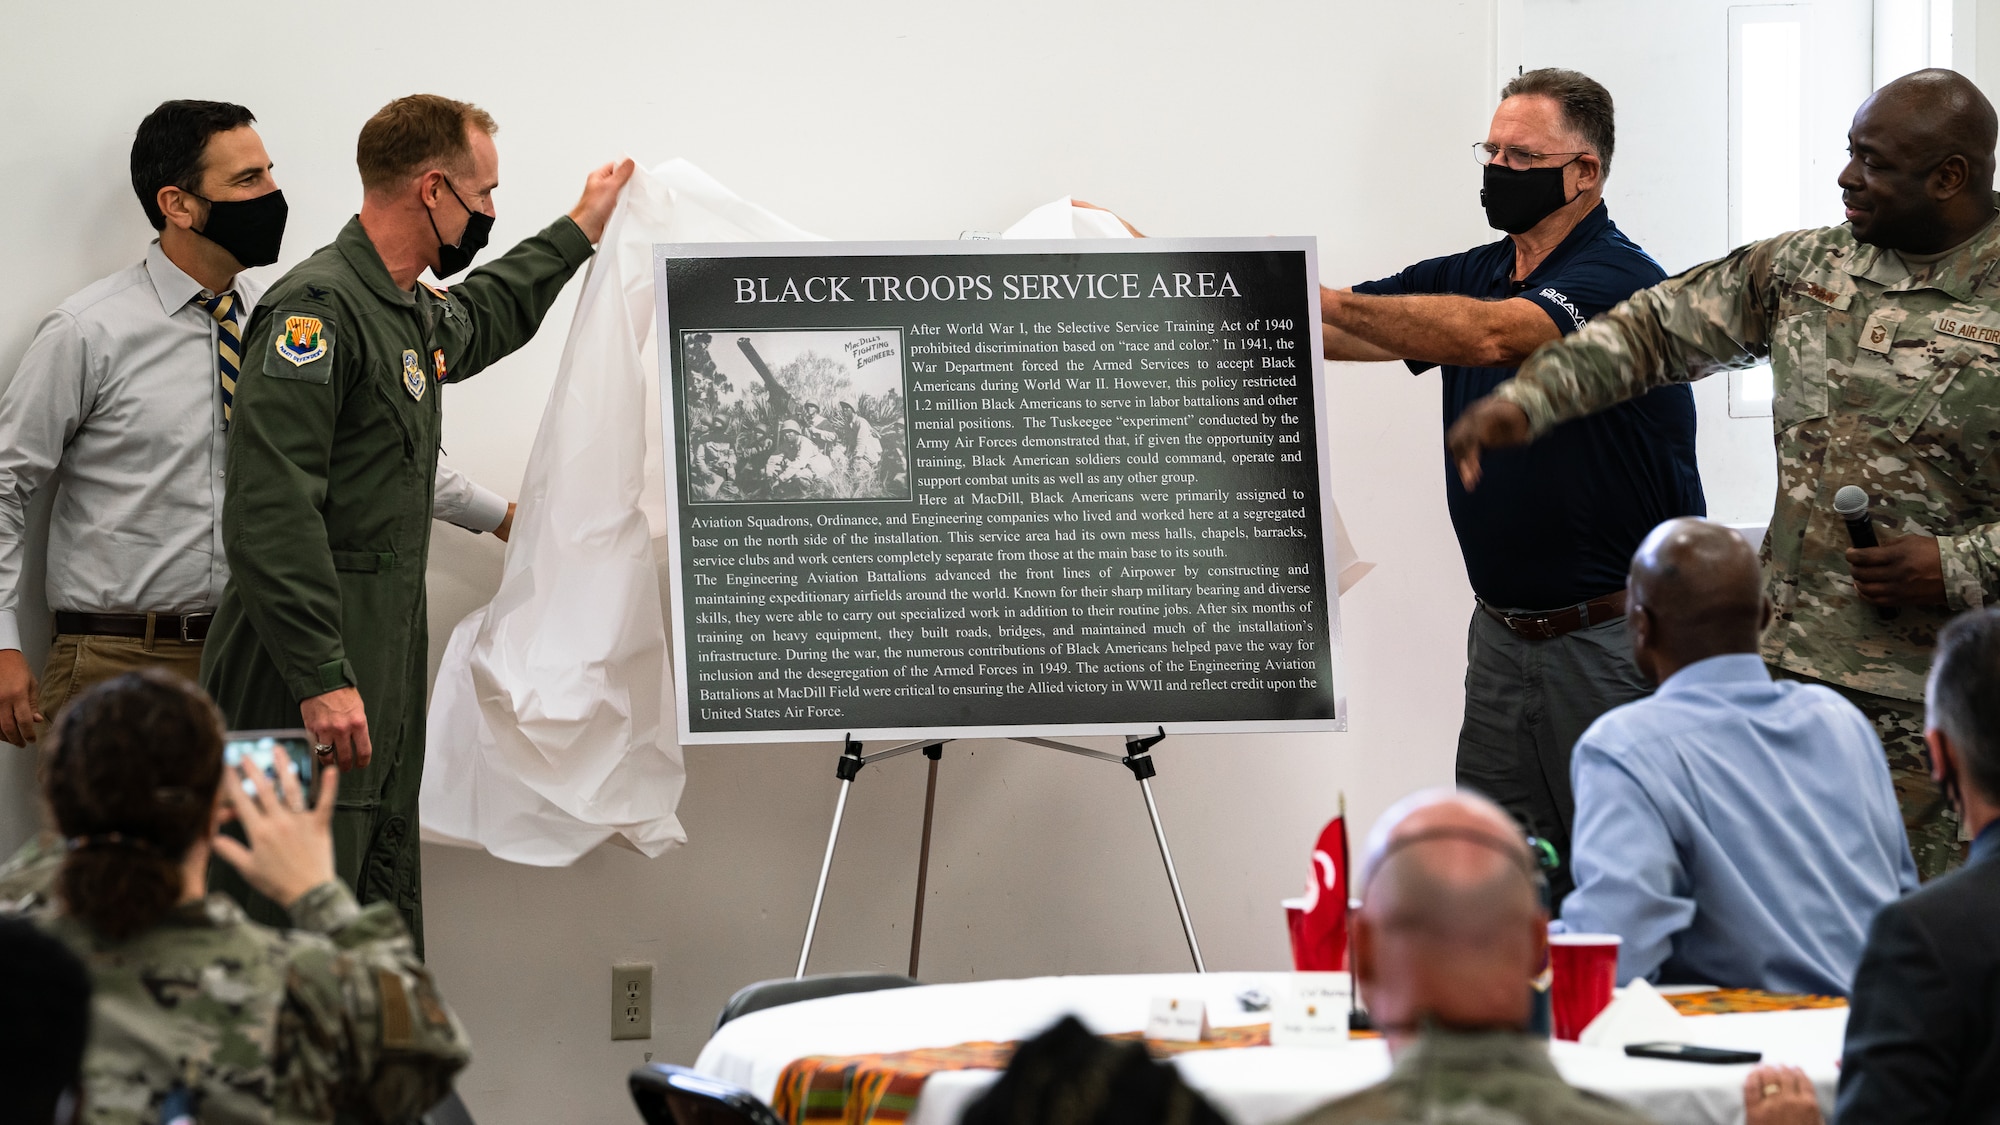 The 6th Air Refueling Wing team responsible for the heritage marker project unveils a “Black Troops Service Area” heritage marker during a Black History Month commemorative luncheon at MacDill Air Force Base, Florida, Feb. 25, 2022. The heritage marker formally recognizes the service of thousands of African Americans who served in engineer aviation battalions during World War II. The efforts of these battalions, which trained at MacDill, expedited the end of the conflict and helped ensure an Allied victory. (U.S. Air Force photo by Airman 1st Class Joshua Hastings)